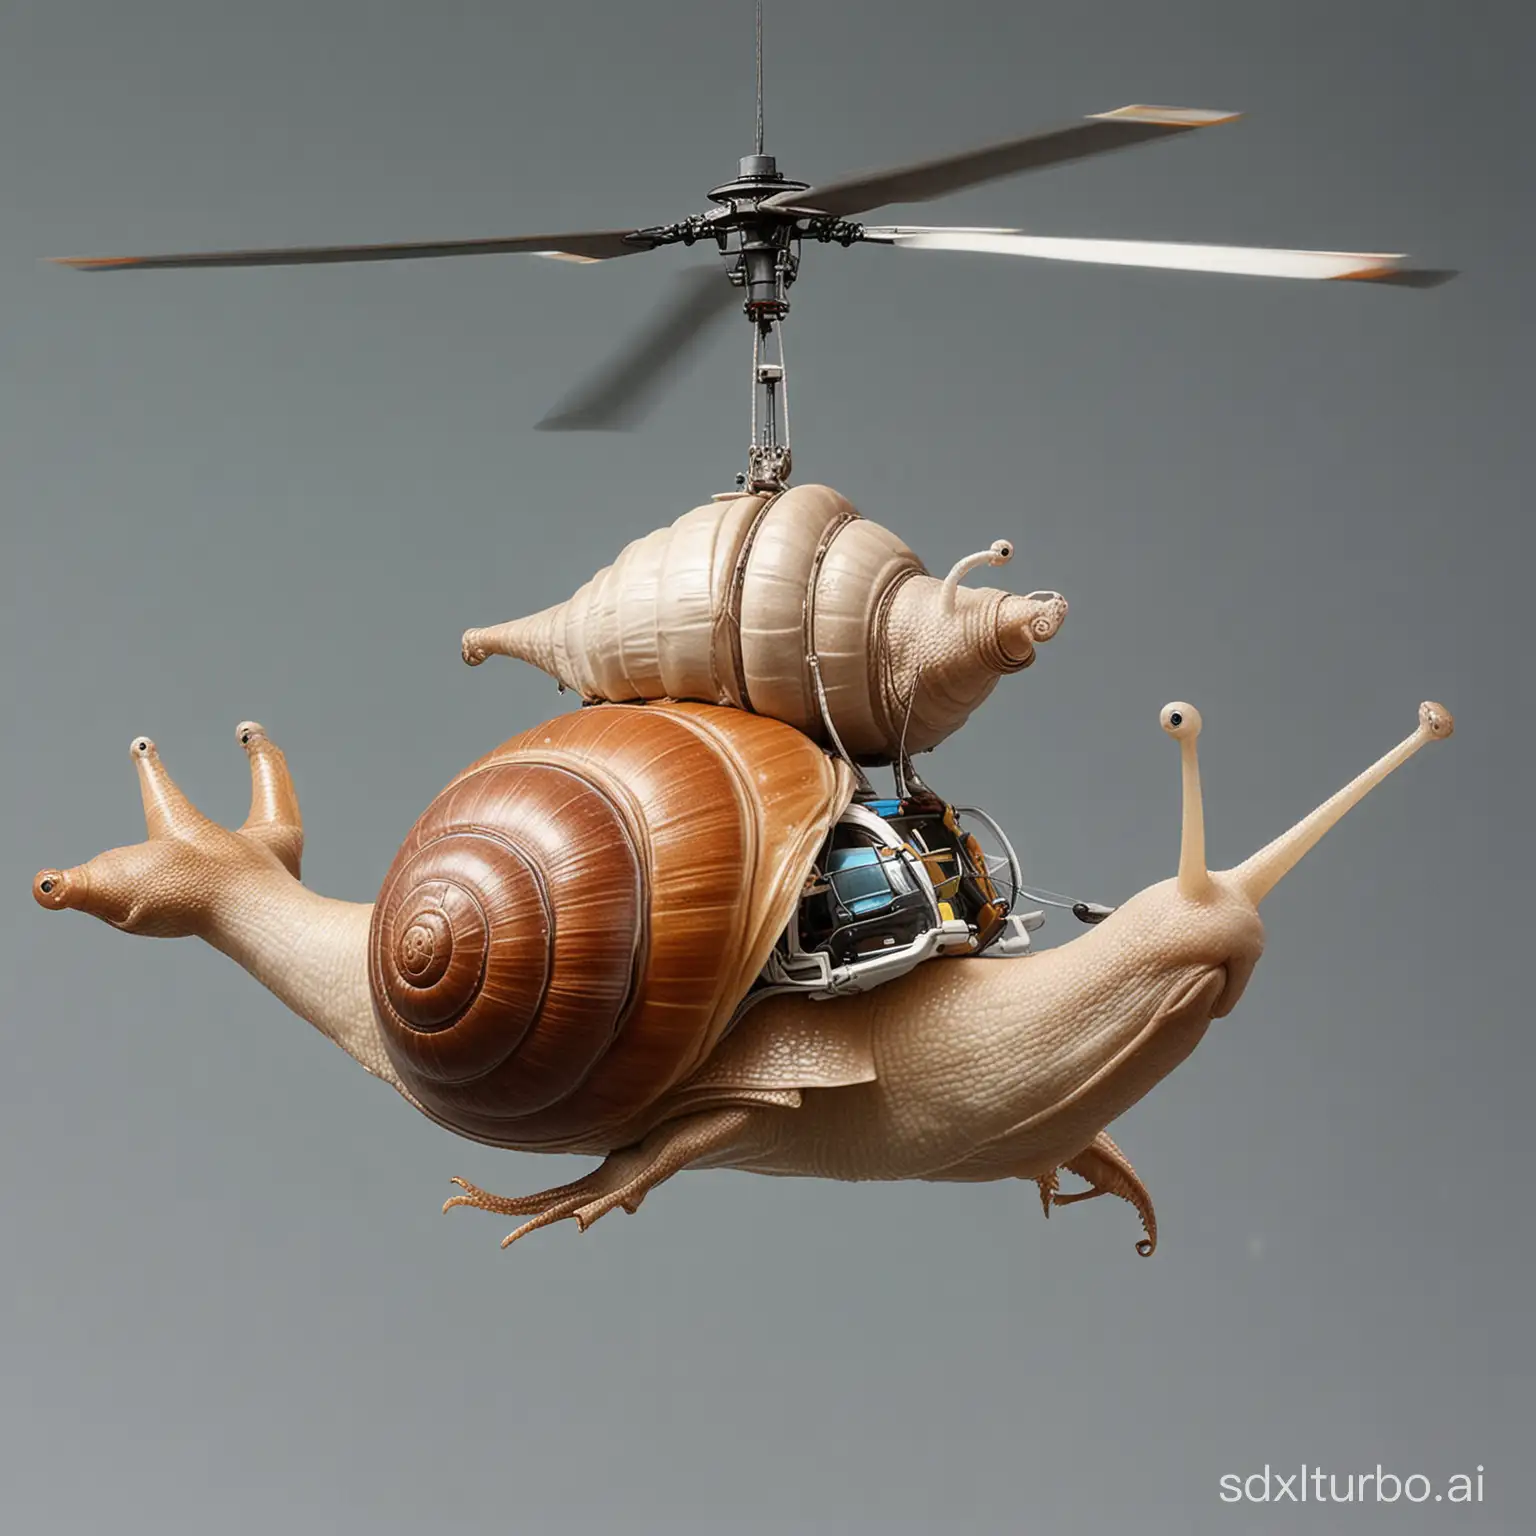 ab big snail with an windbeutel on her back with helicopter wings